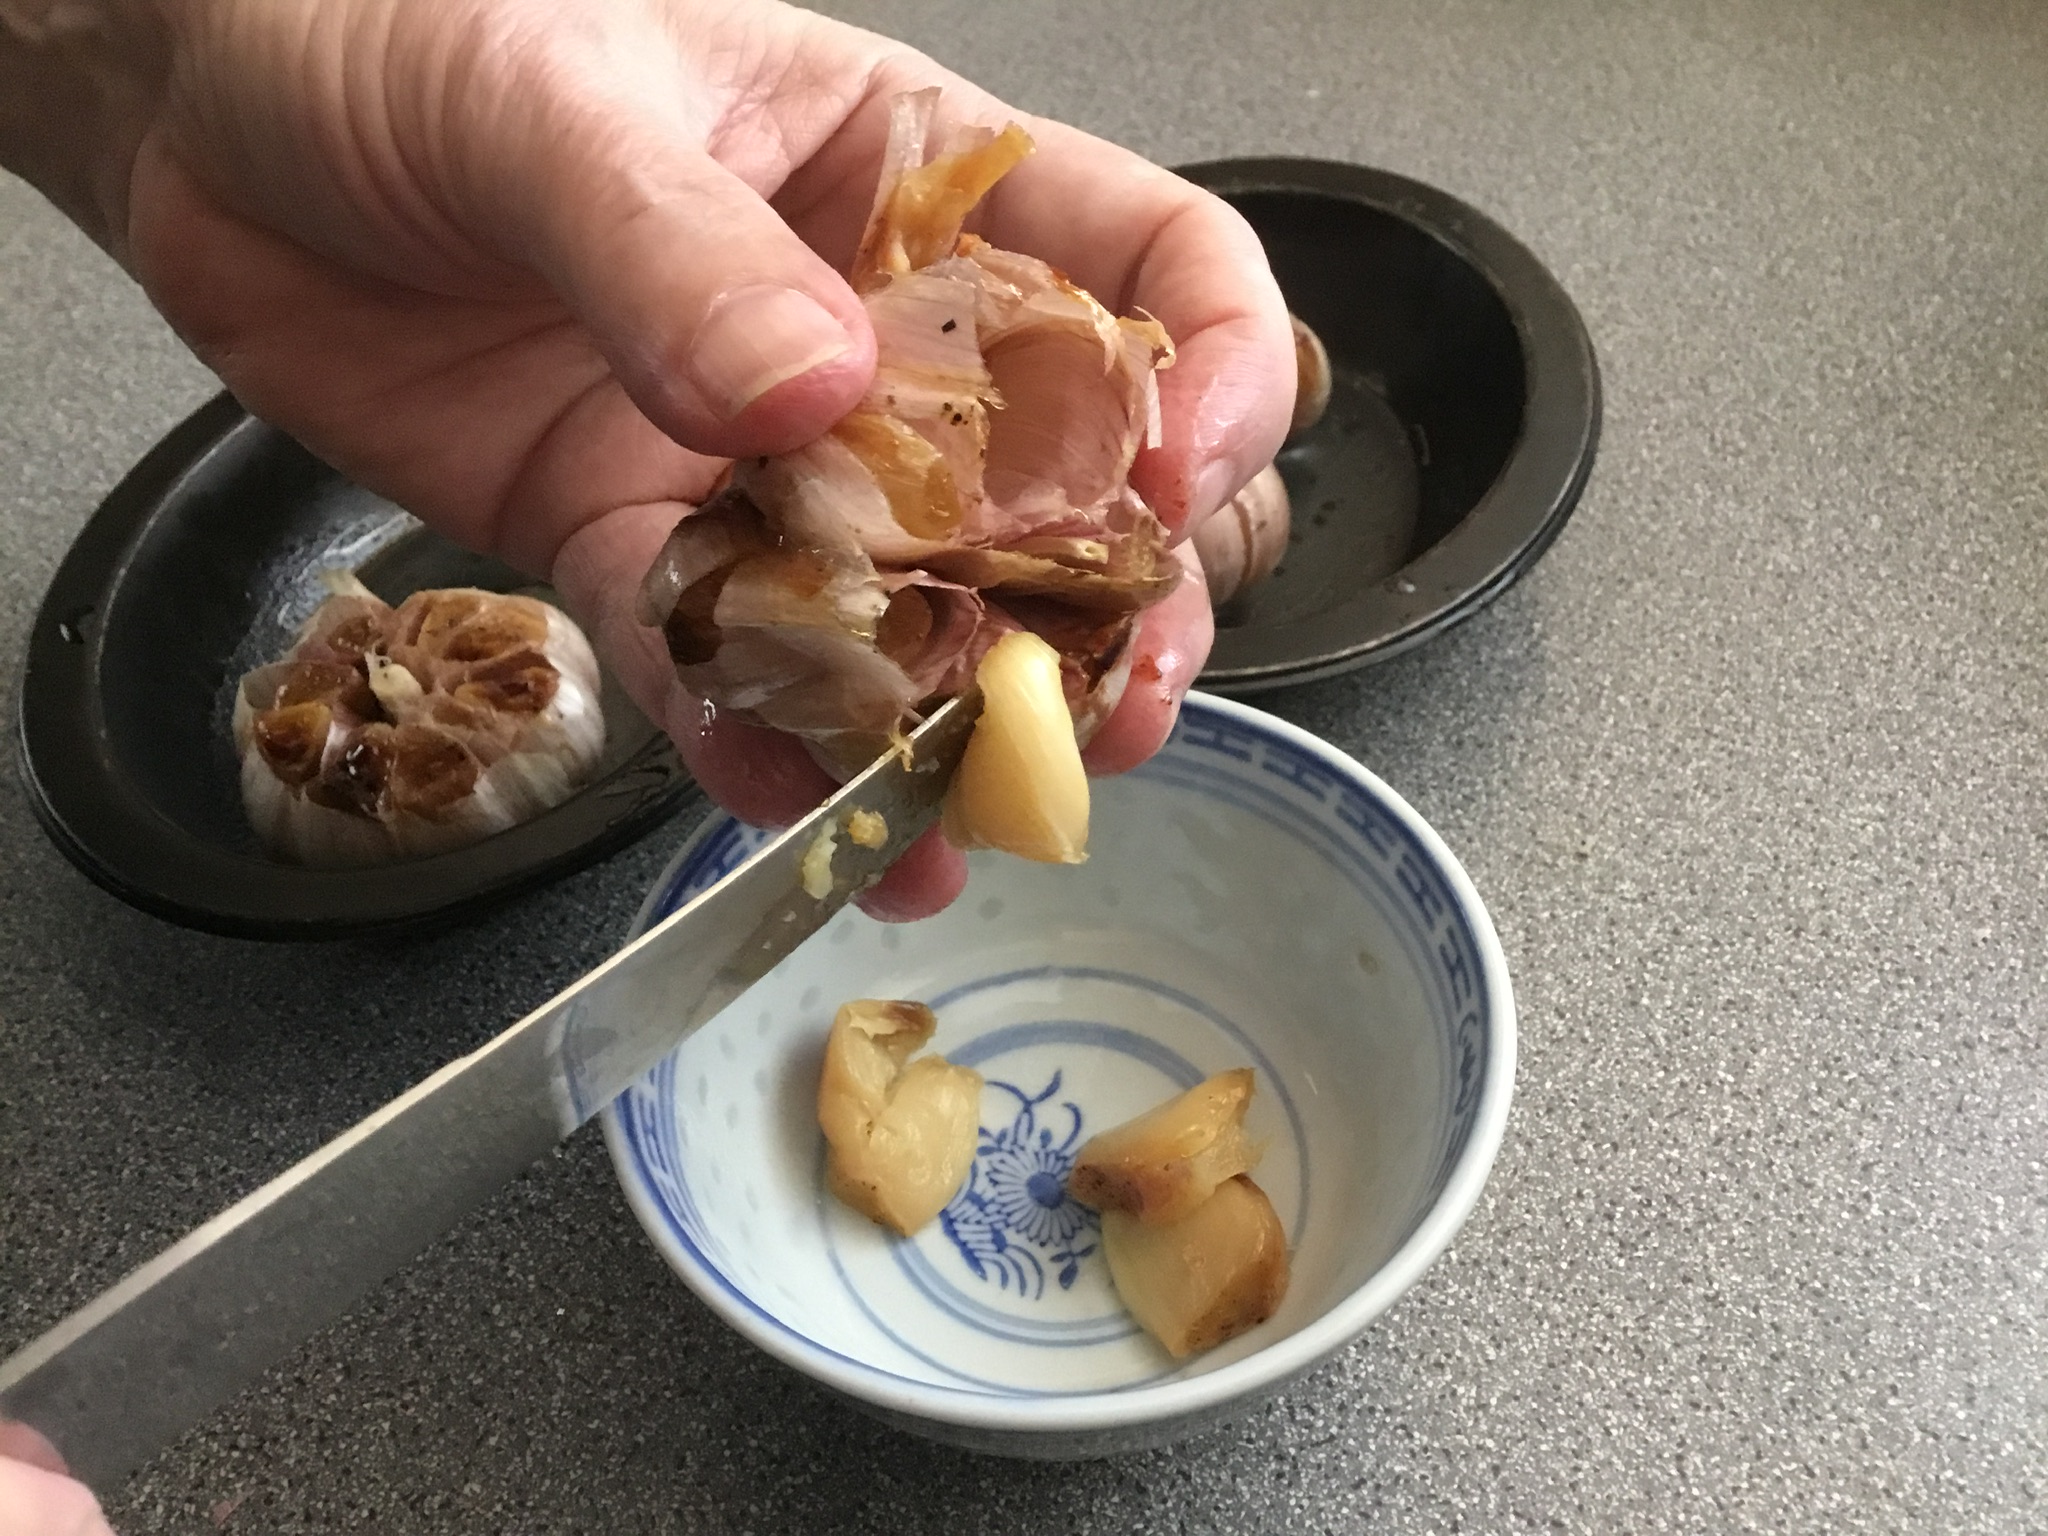 Removing the roasted garlic cloves from the head